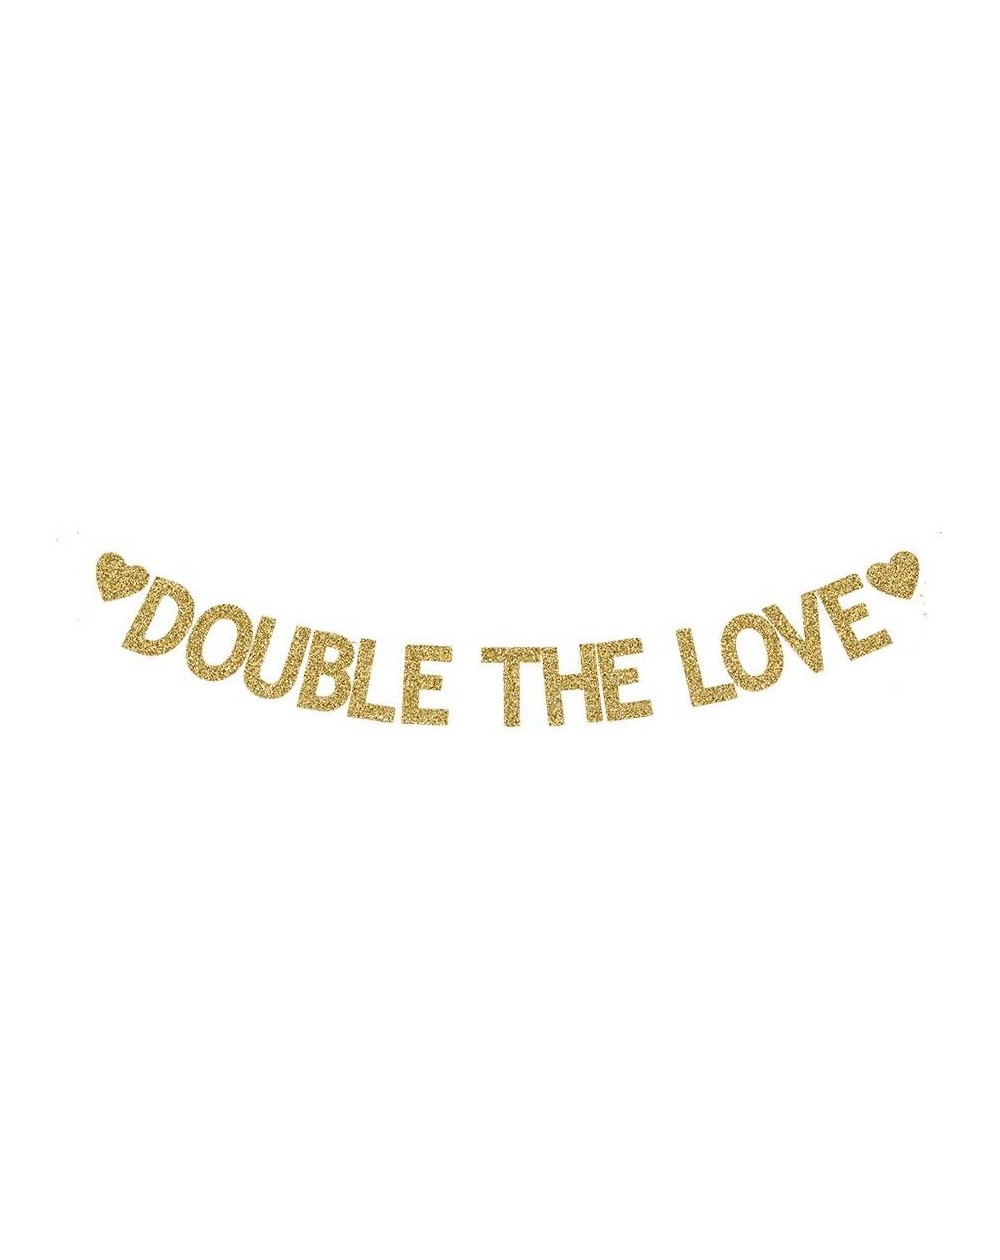 Banners & Garlands Double The Love Banner- Twins Baby Shower/Twins Birthday/Engagement/Wedding Party Gold Gliter Paper Sign D...